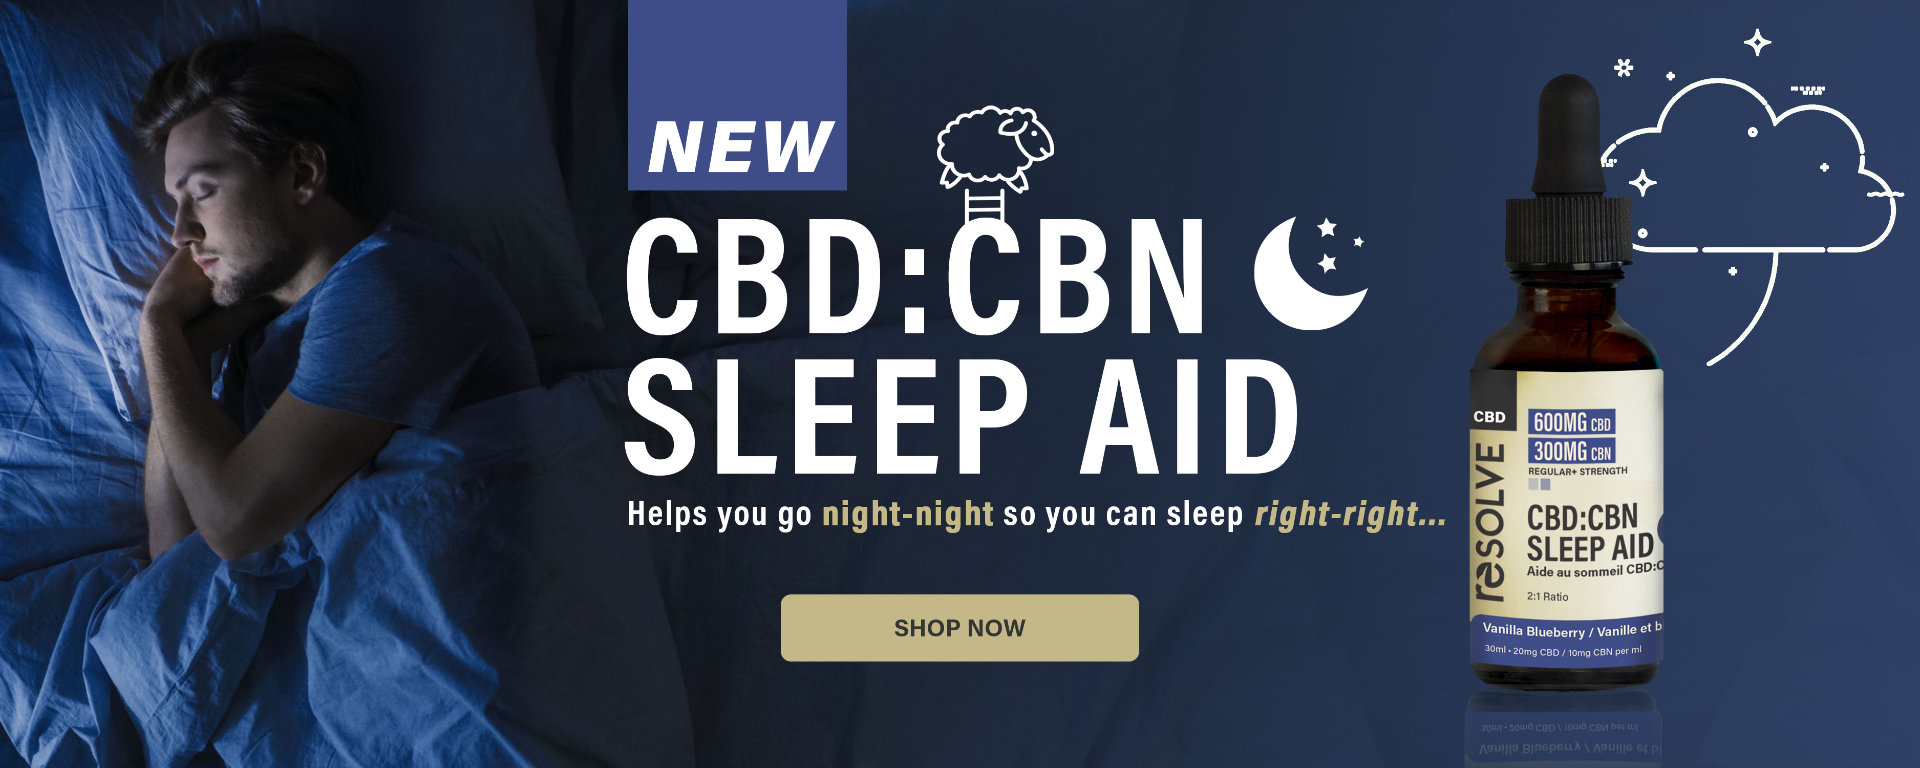 CBD:CBN Sleep Aid Campaign. Man sleeping soundly in bed on the left and a bottle of resolveCBD SLeep aid tincture! Click on the banner to shop now! Use code helpmesleep15 at checkout!